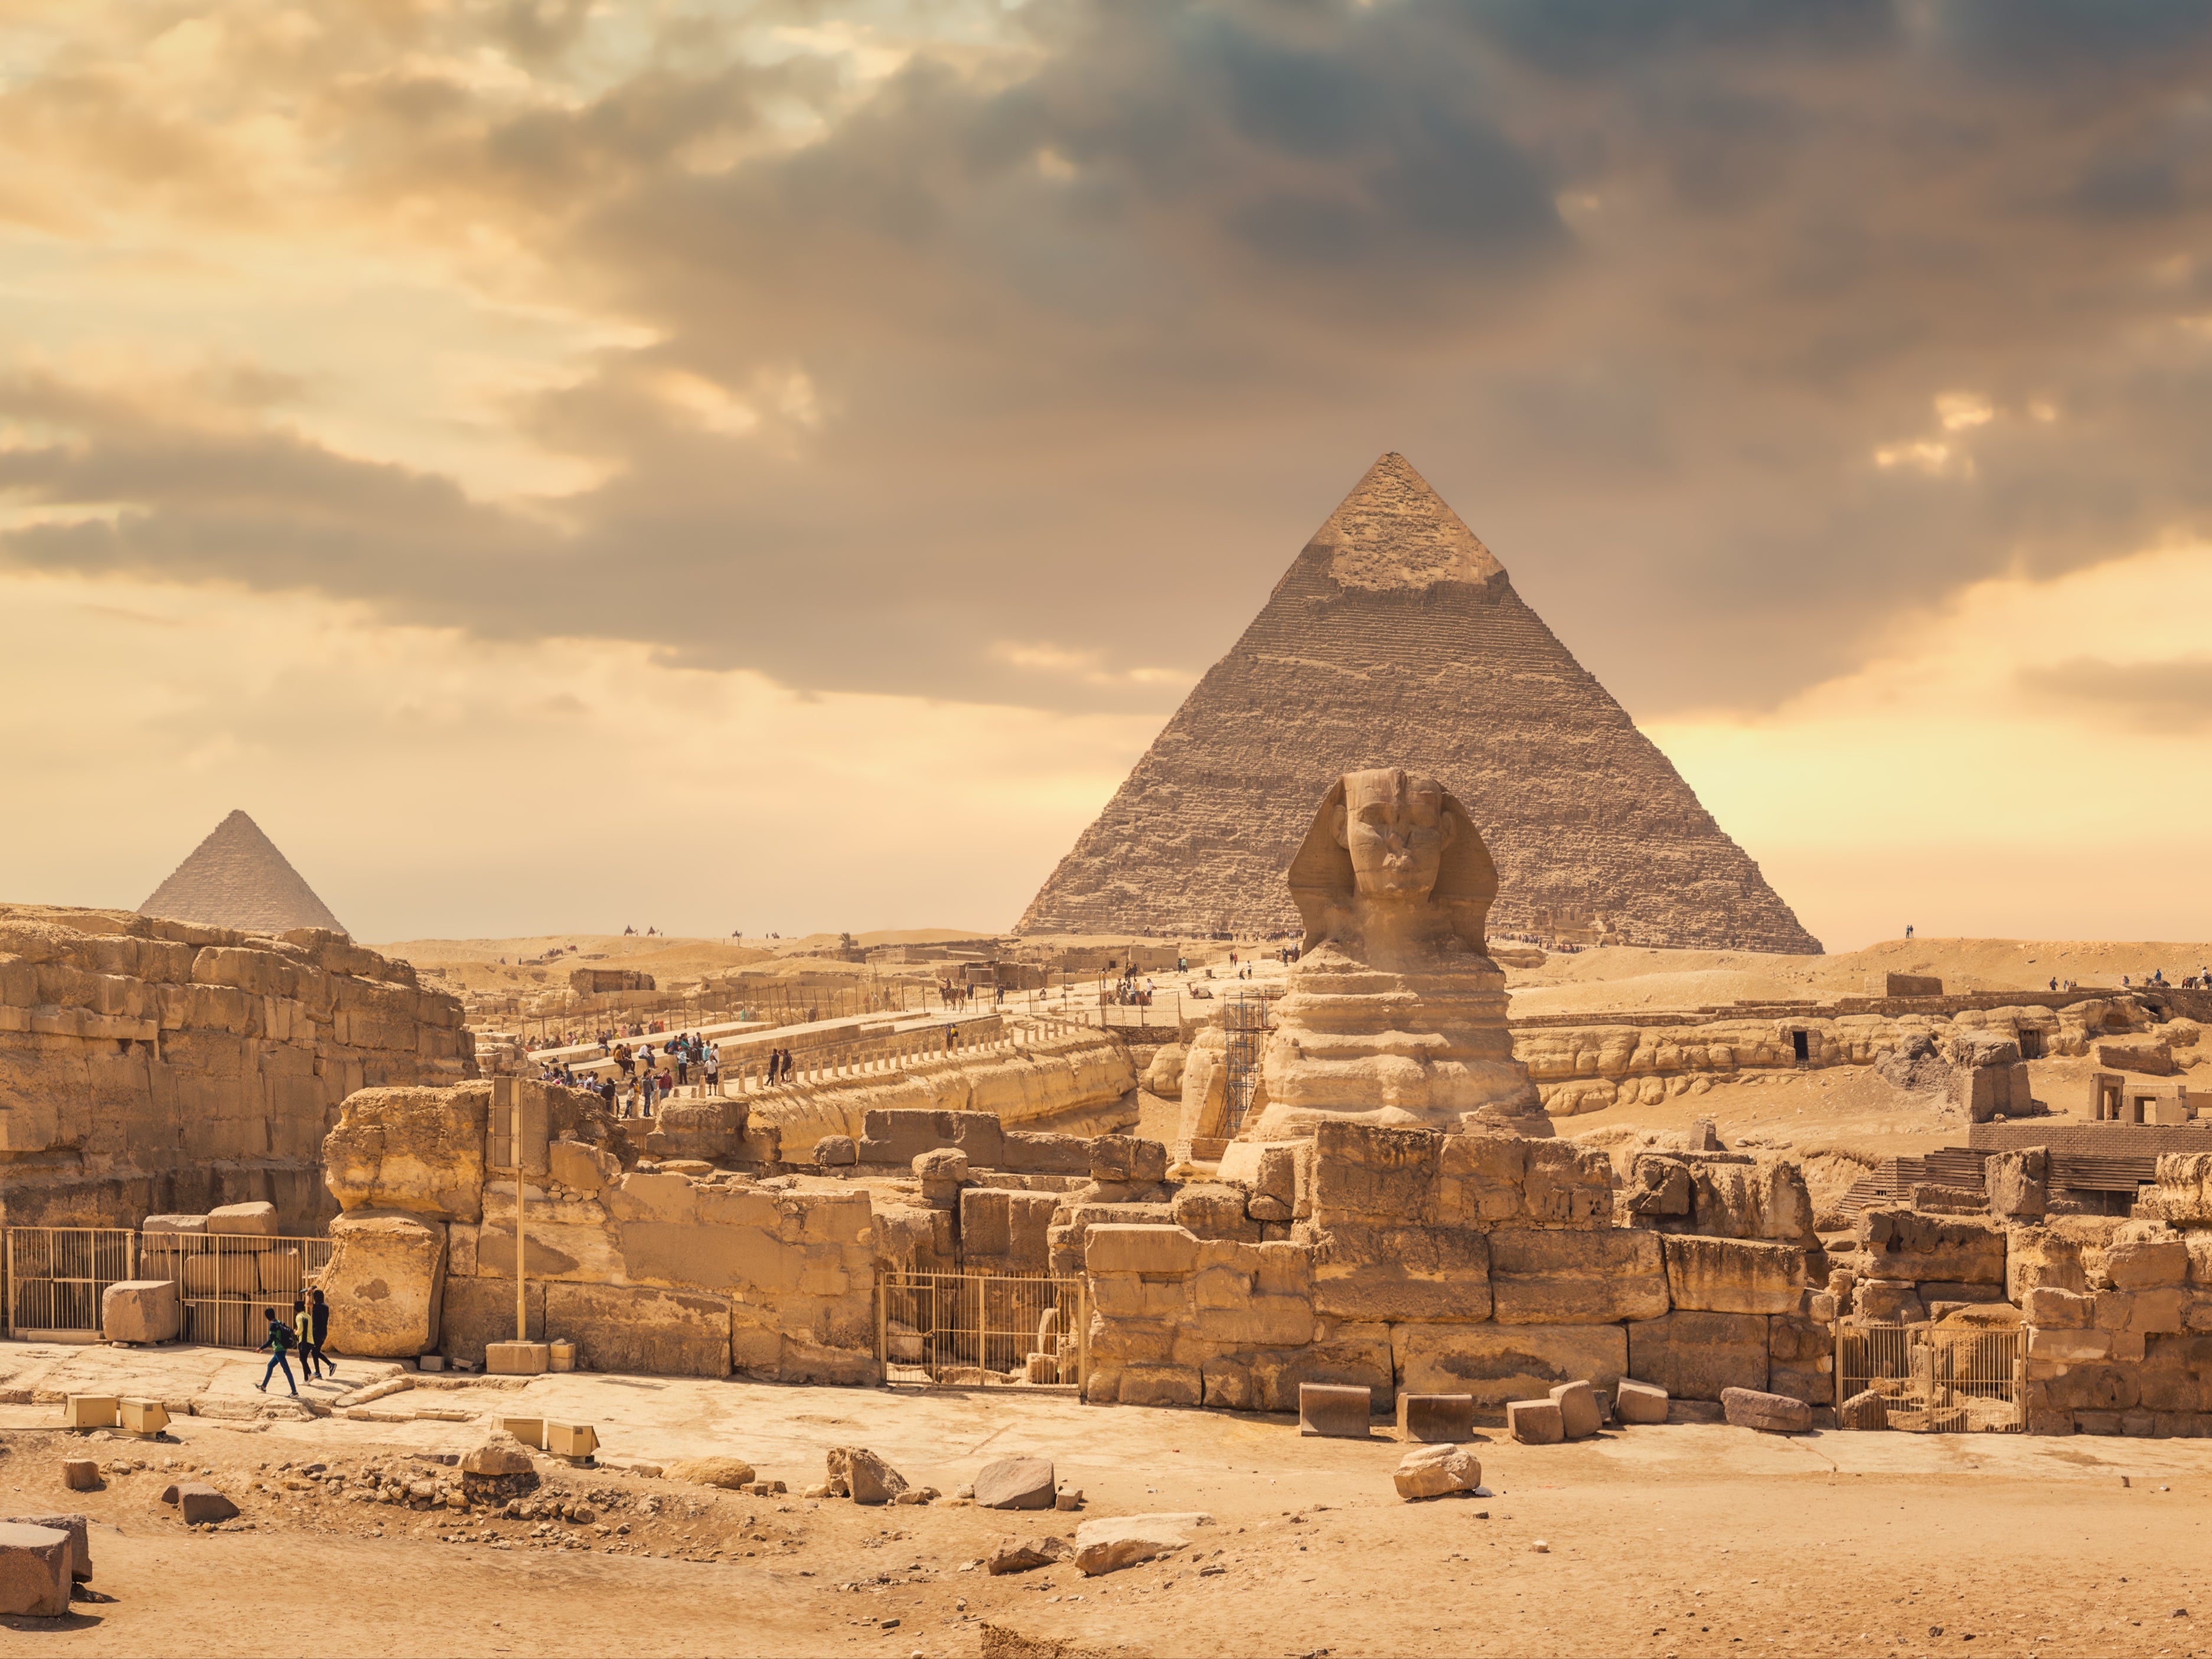 Explore Egypt’s famous Great Pyramids – on a group tour or tailor-made holiday